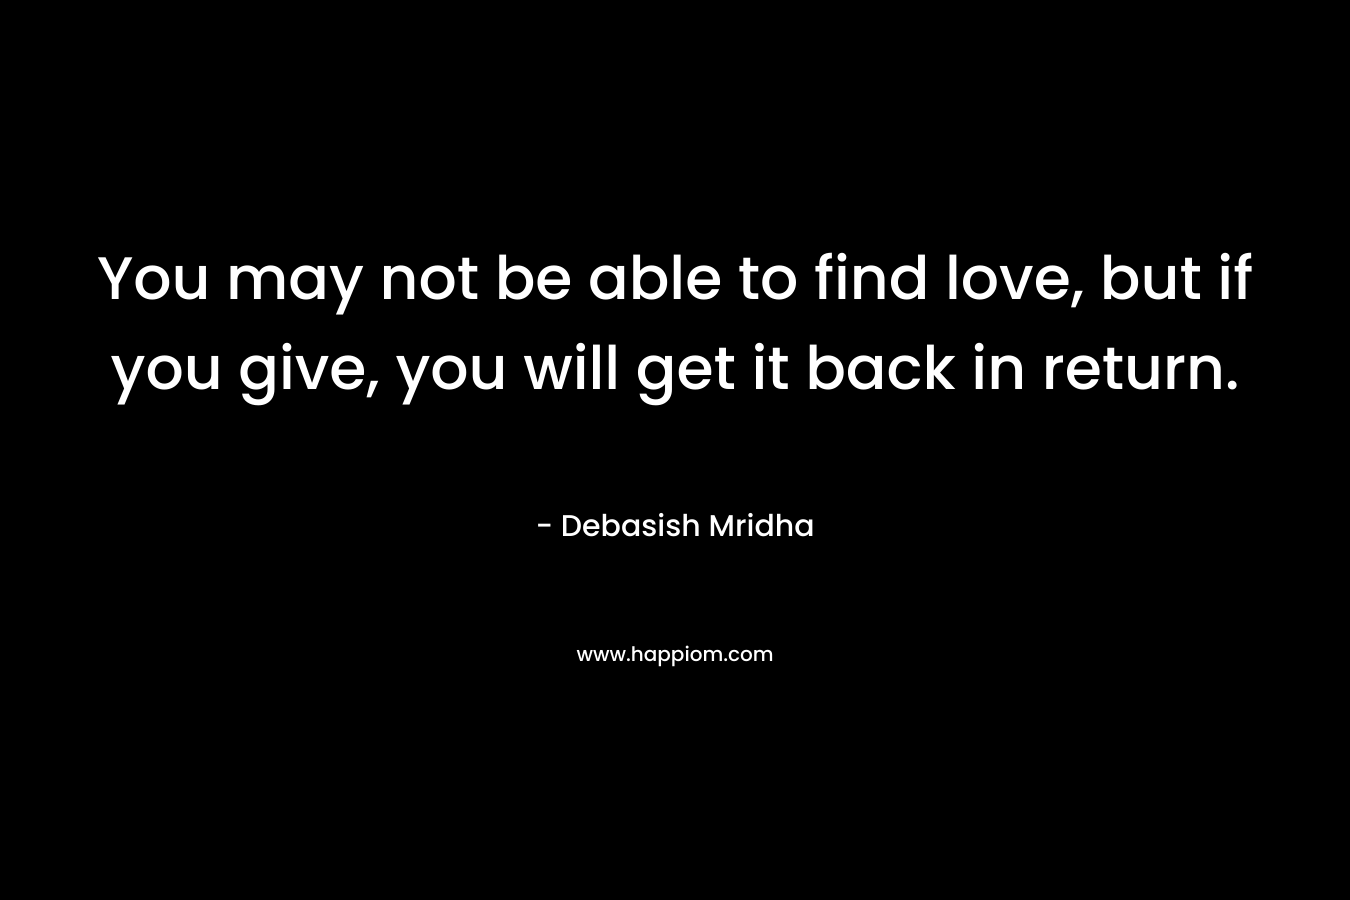 You may not be able to find love, but if you give, you will get it back in return.